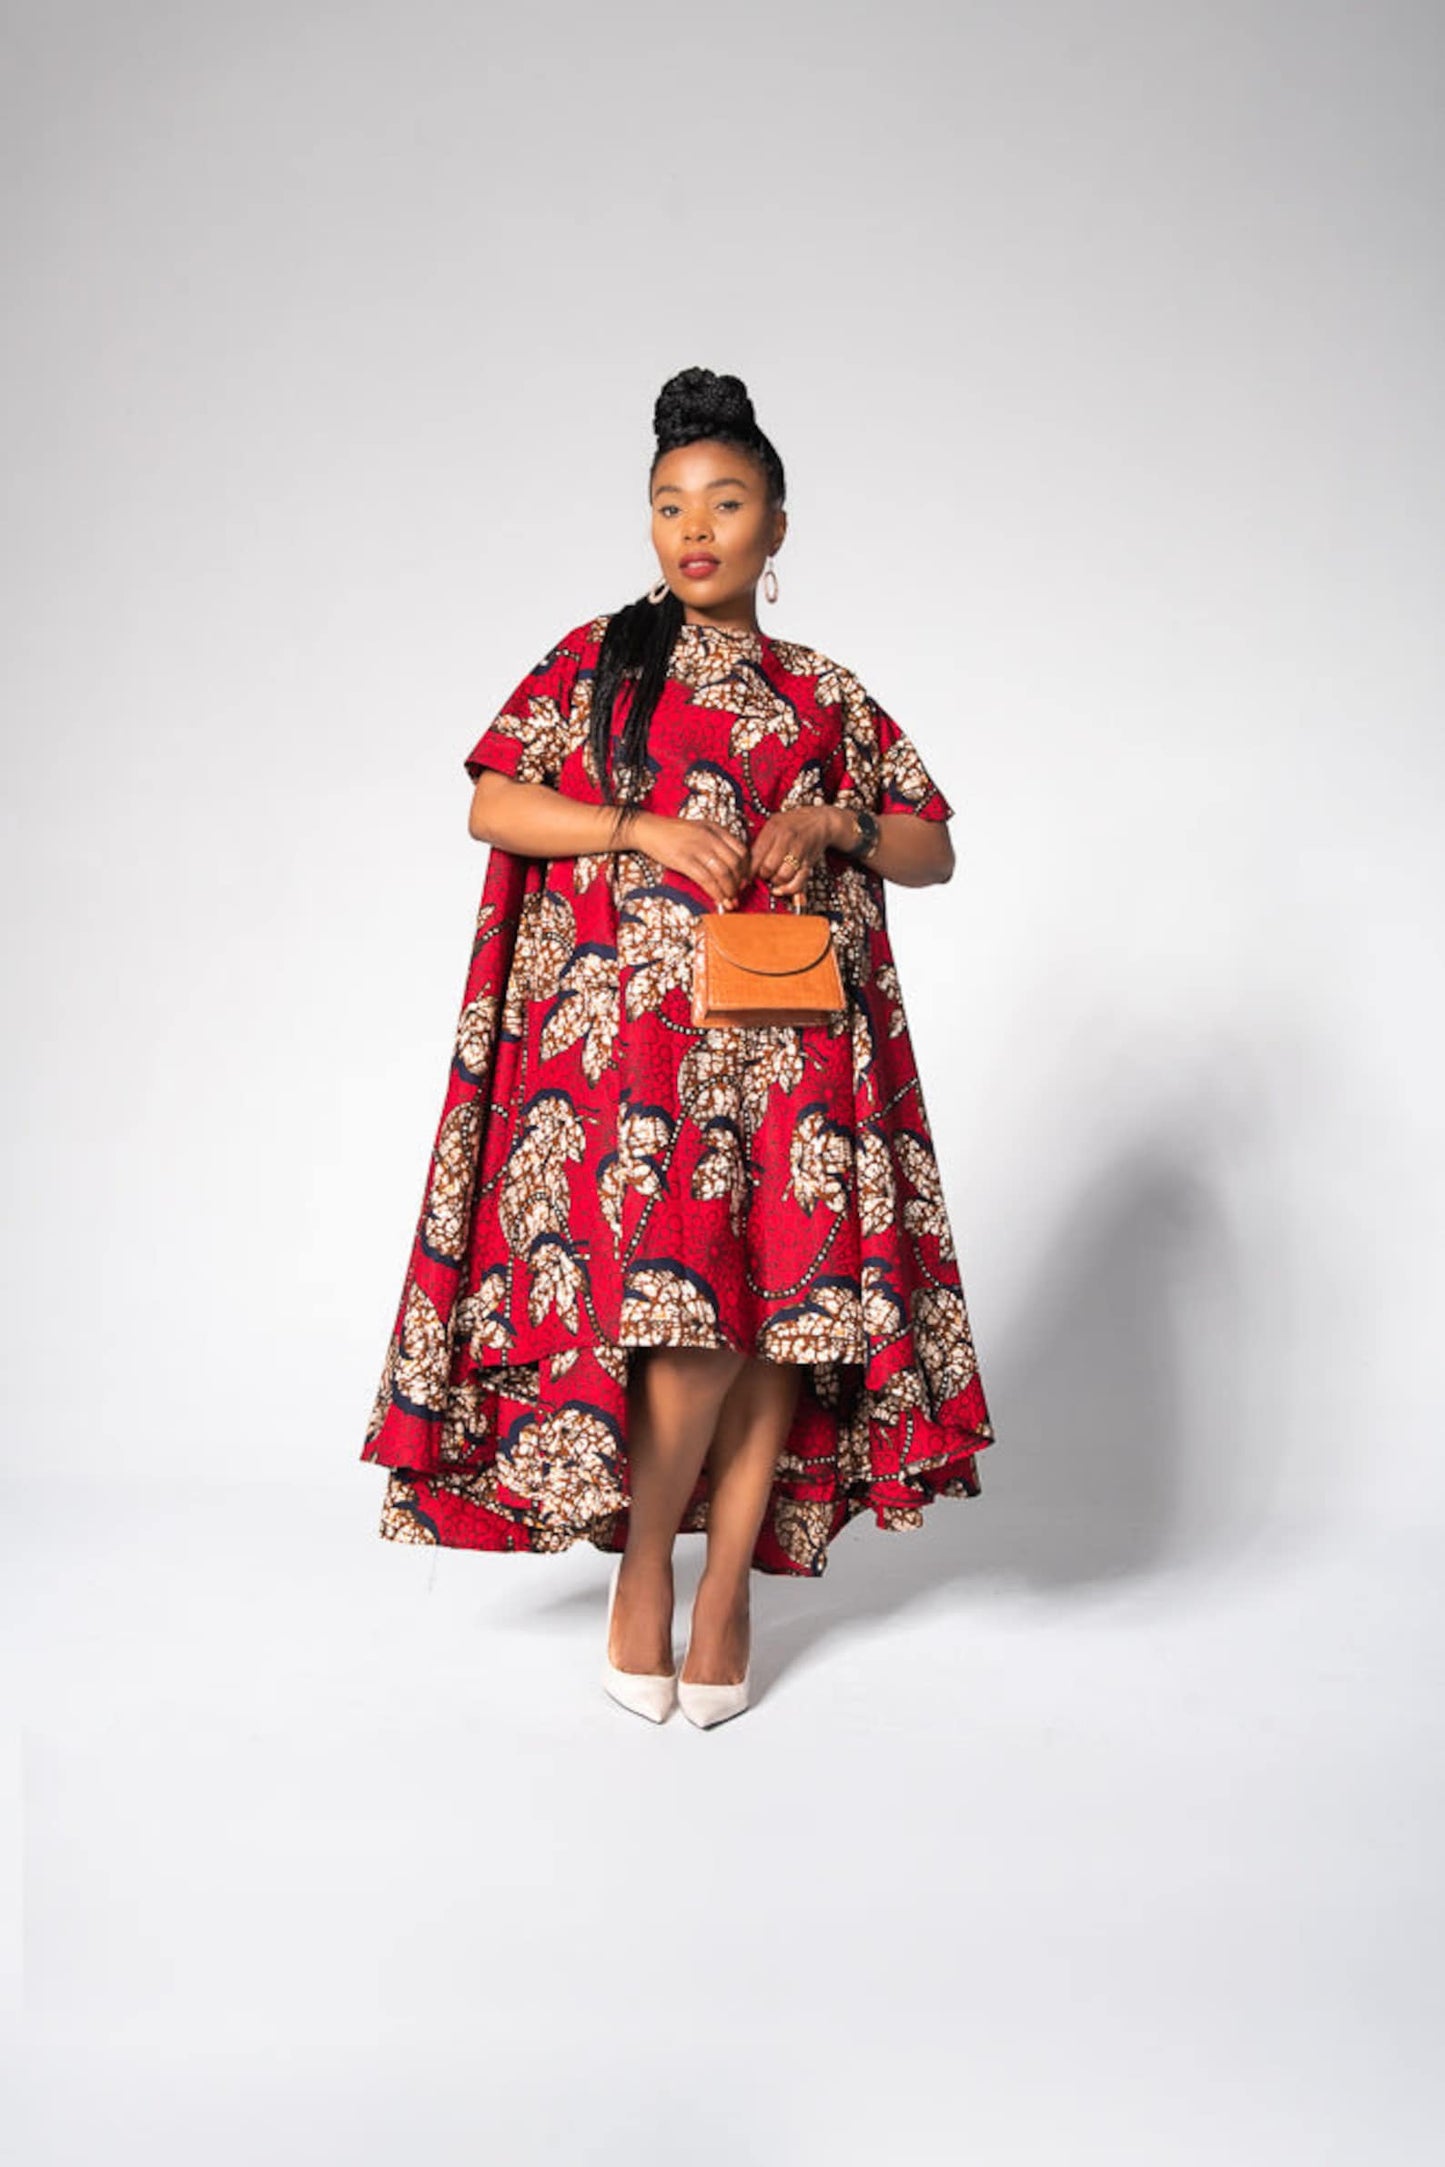 RED AFRICAN ANKARA PRINT PLUS SIZE CLOTHING PARTY DRESS